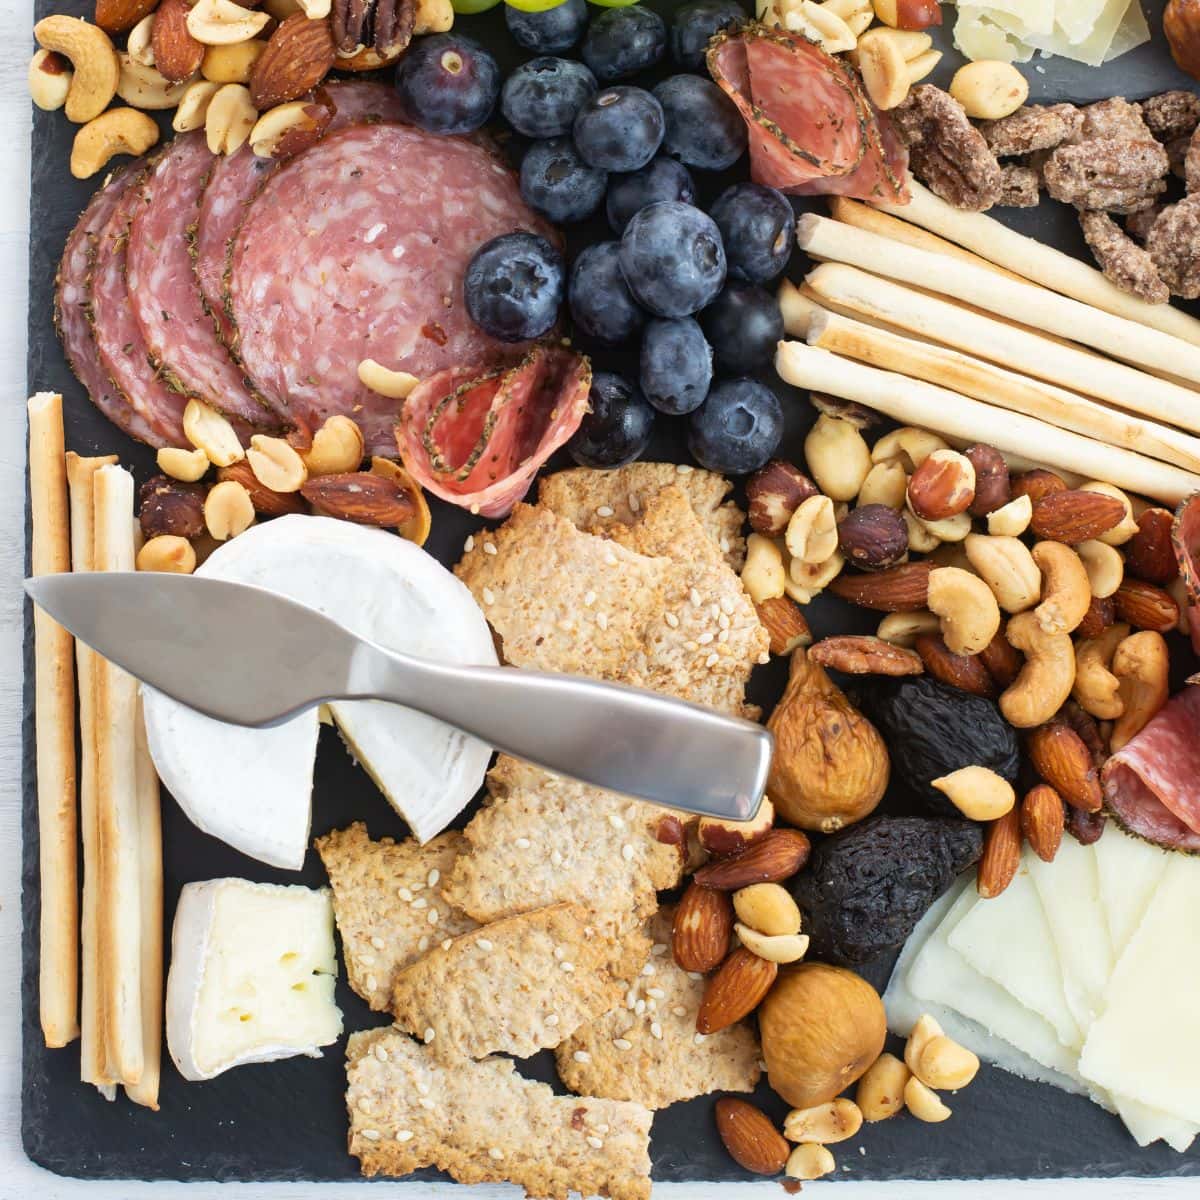 Image of a cheese platter covered with different appetizer options.